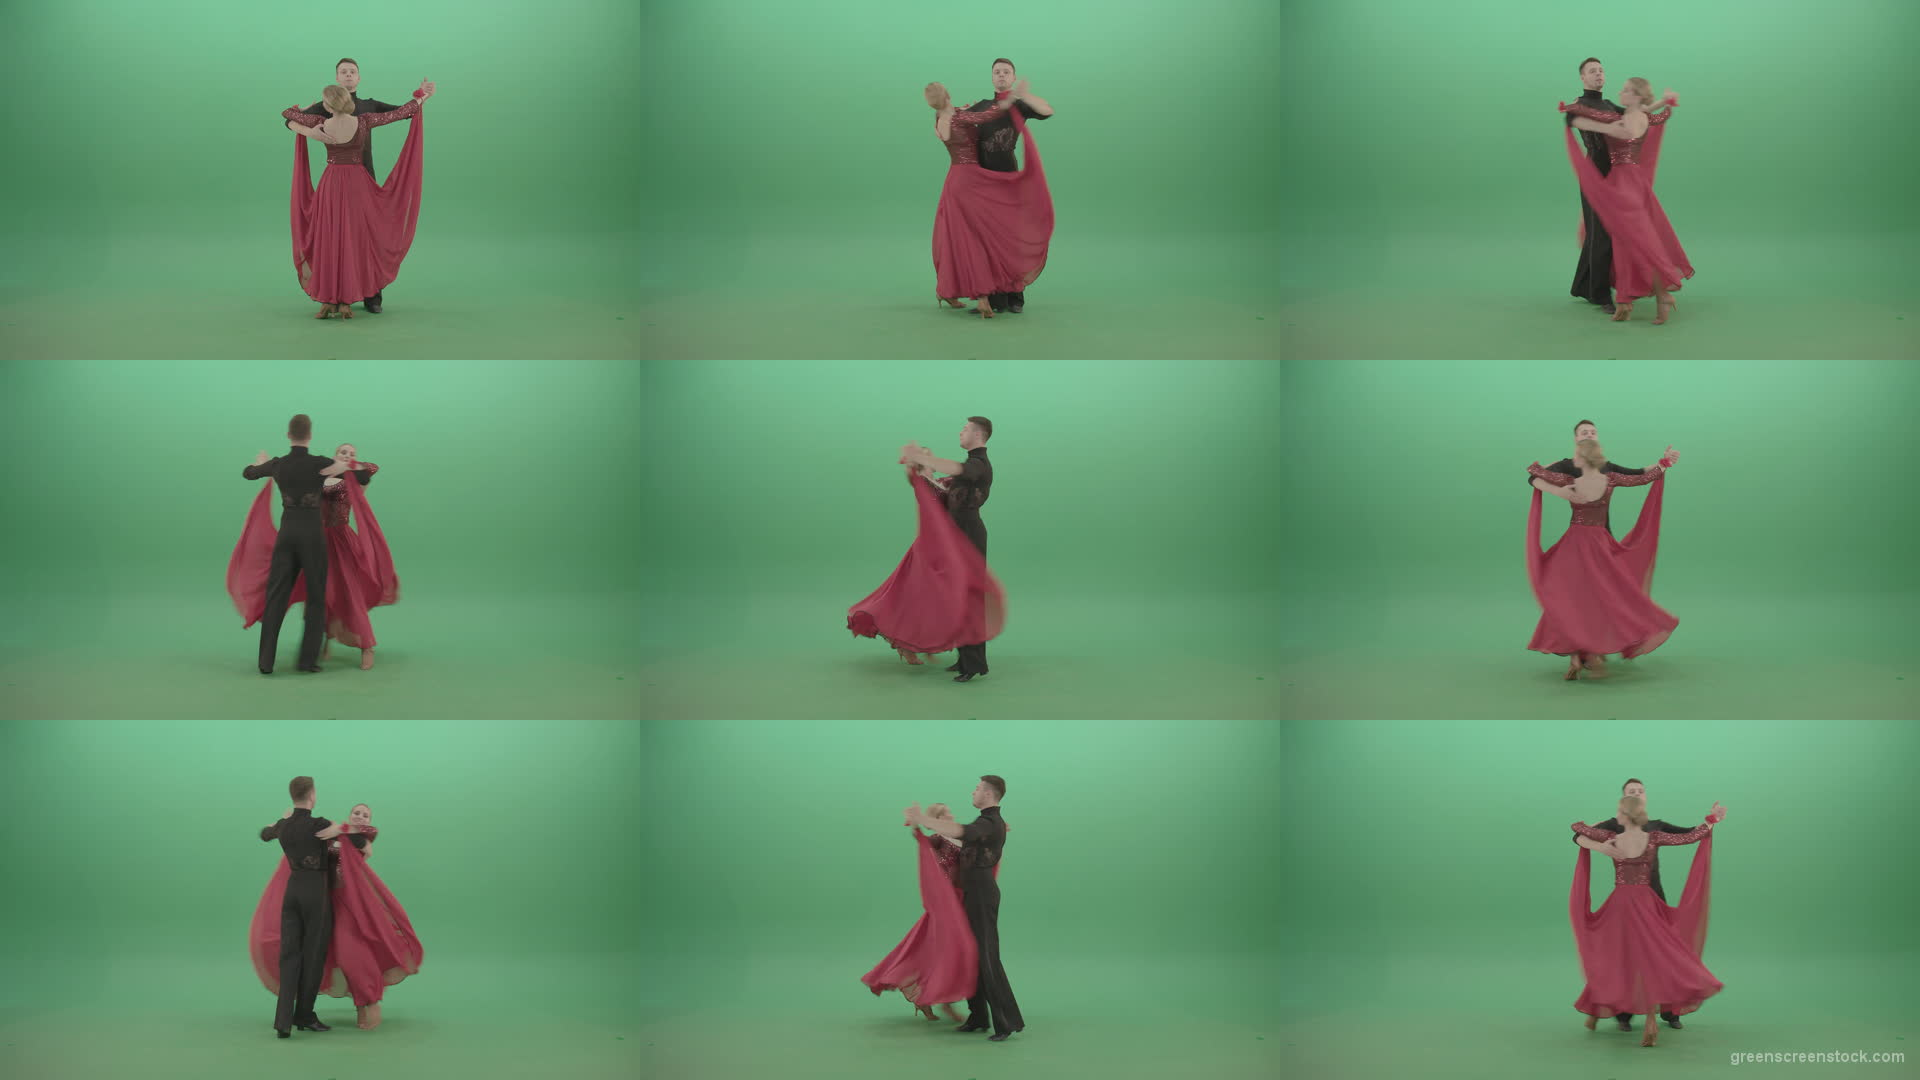 Young-couple-in-red-black-costume-spinning-dancing-ballroom-latina-dance-over-green-screen-4K-Video-Footage-1920 Green Screen Stock